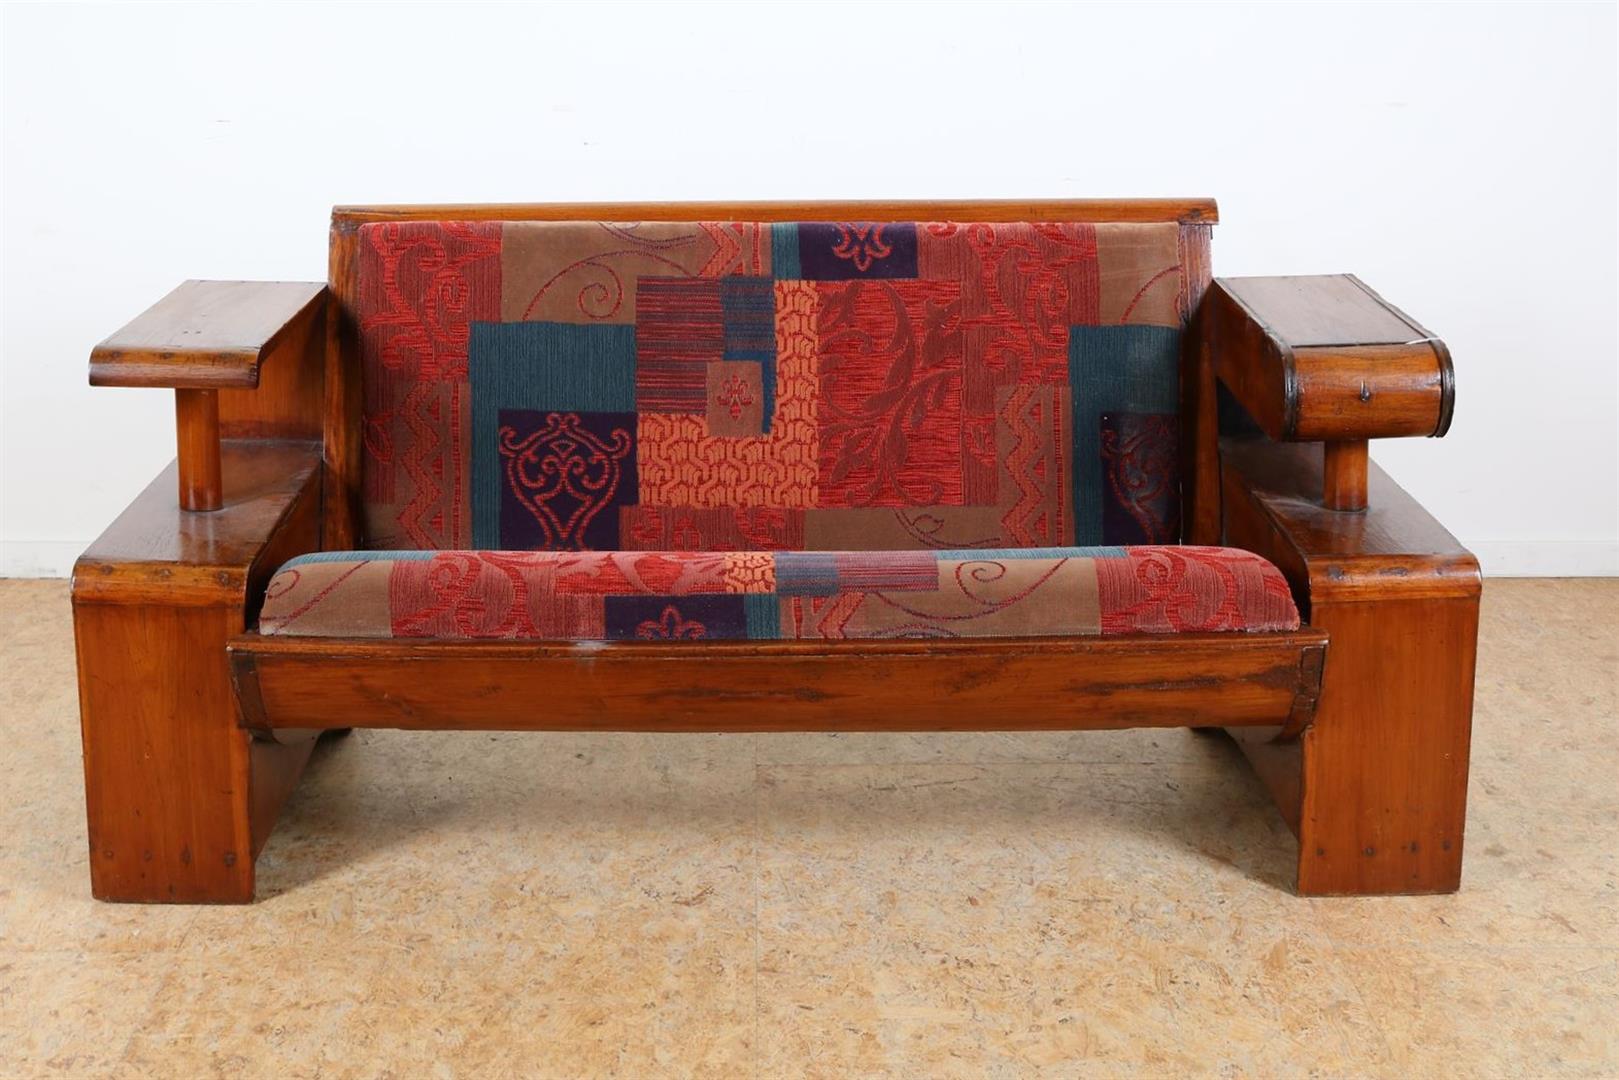 Teak Art Deco sofa with bookcases and drawer in armrest with colored velvet upholstery, Indonesia